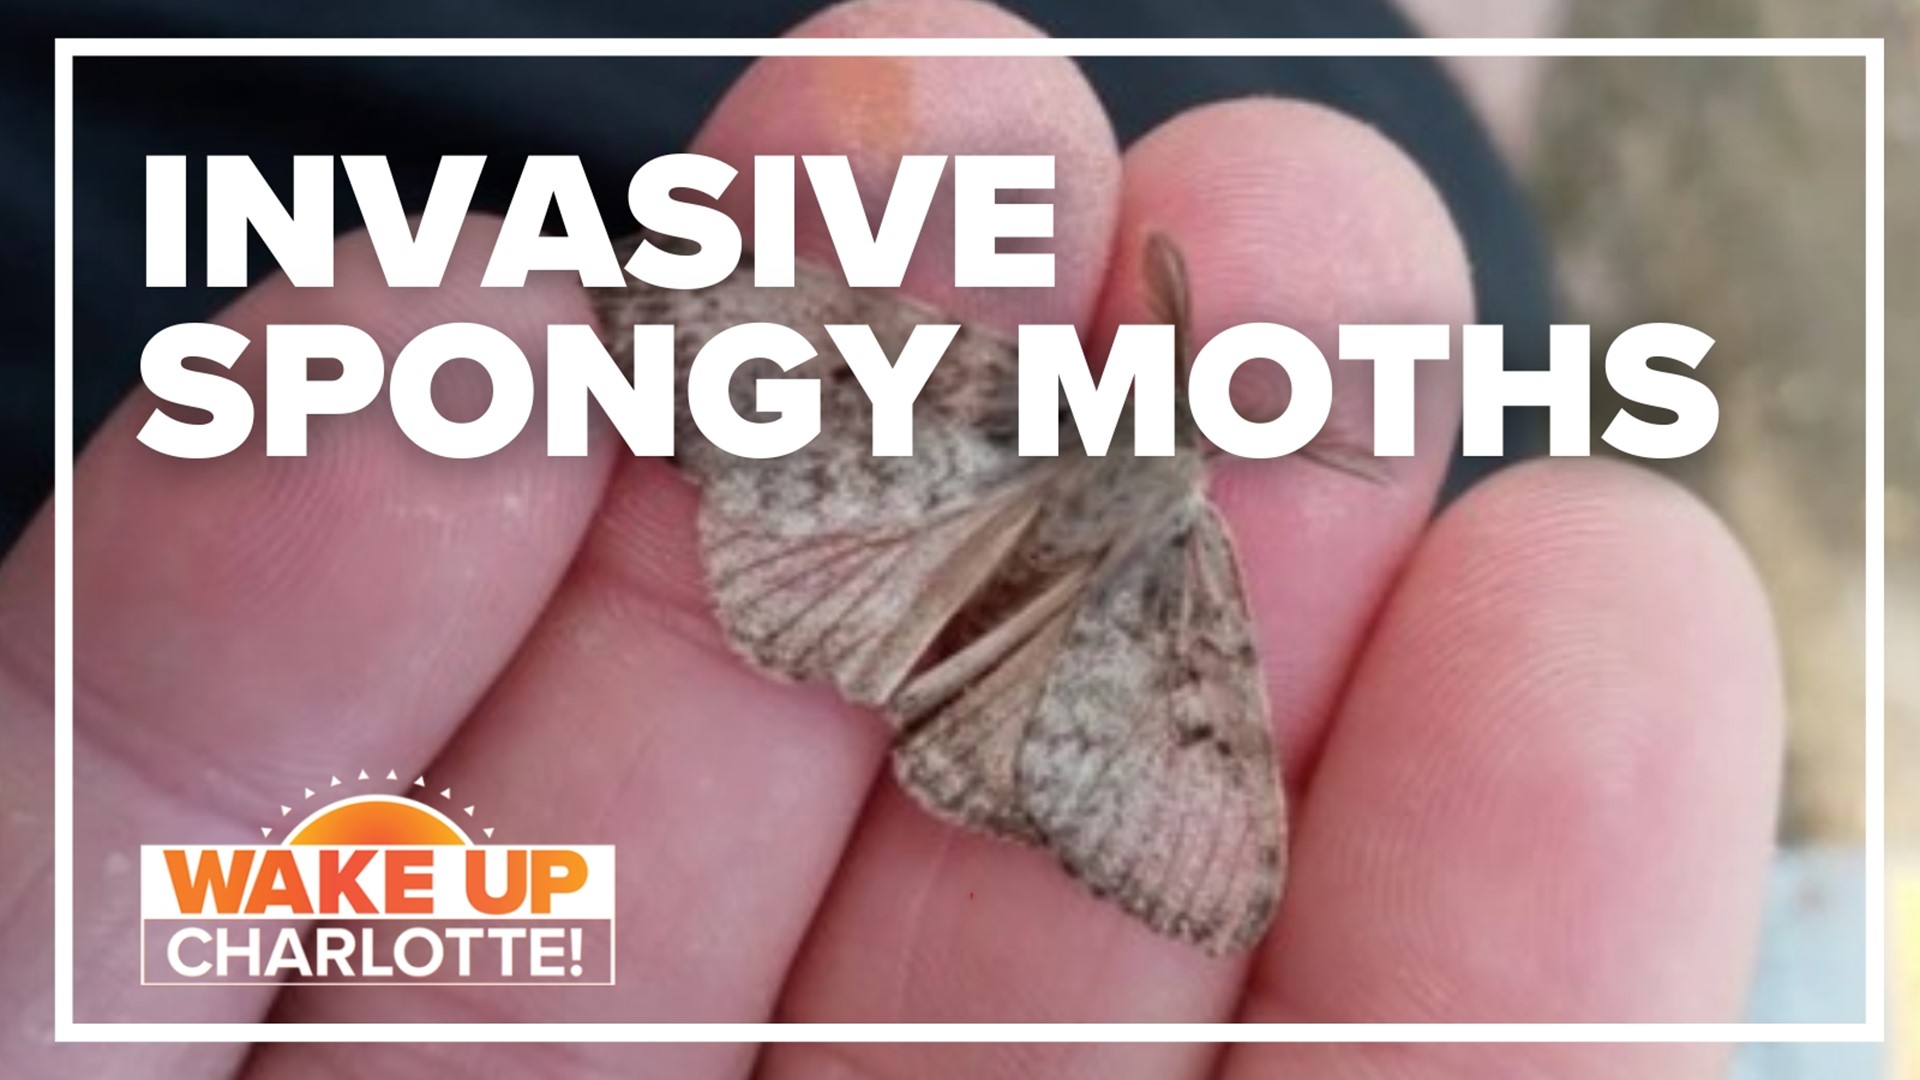 Spongy moths are an invasive species and experts are trying to slow the spread before it's too late.